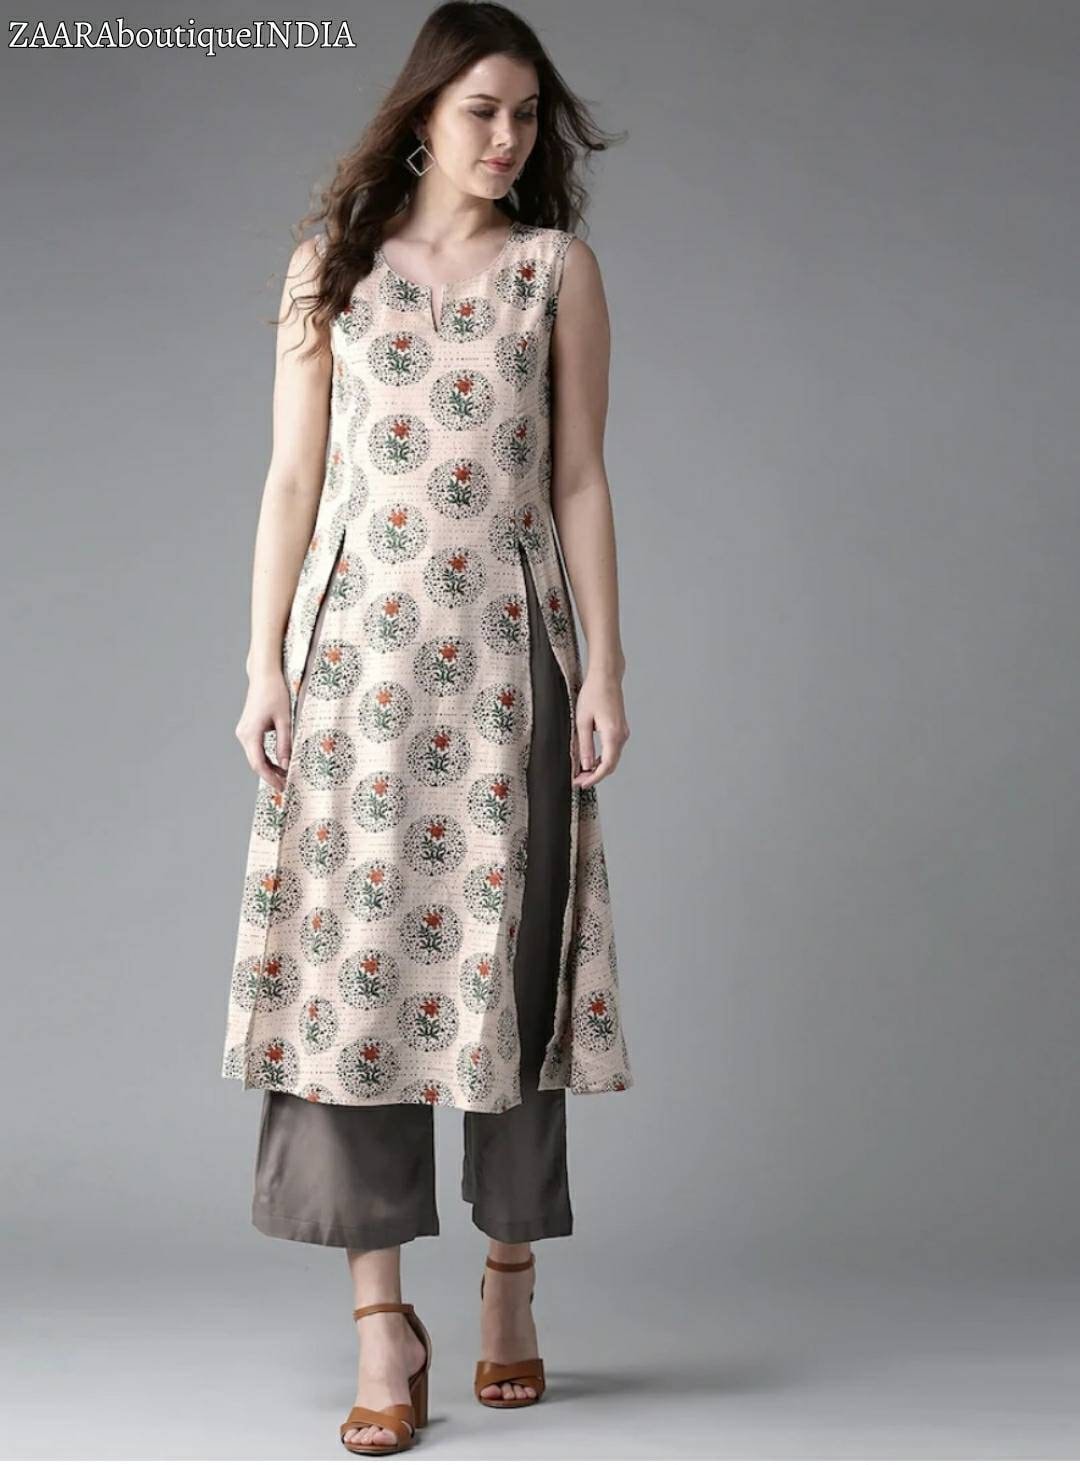 6 Types of Bottoms To Pair With Cape Style Kurtis – MISSPRINT